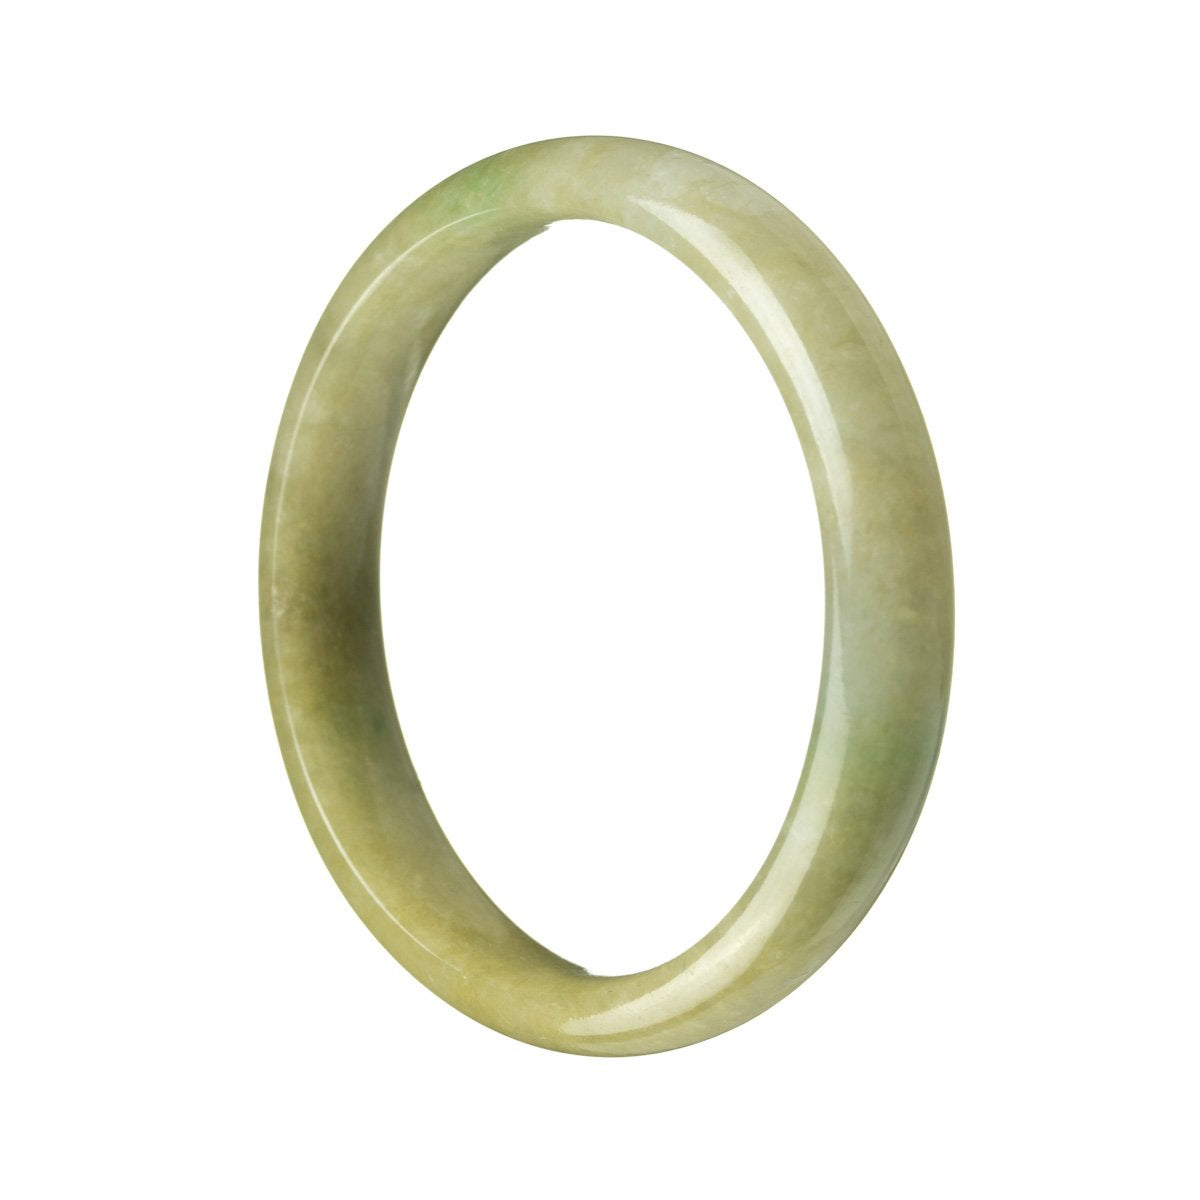 A half moon-shaped brownish green traditional jade bangle bracelet, measuring 59mm in diameter, from MAYS.